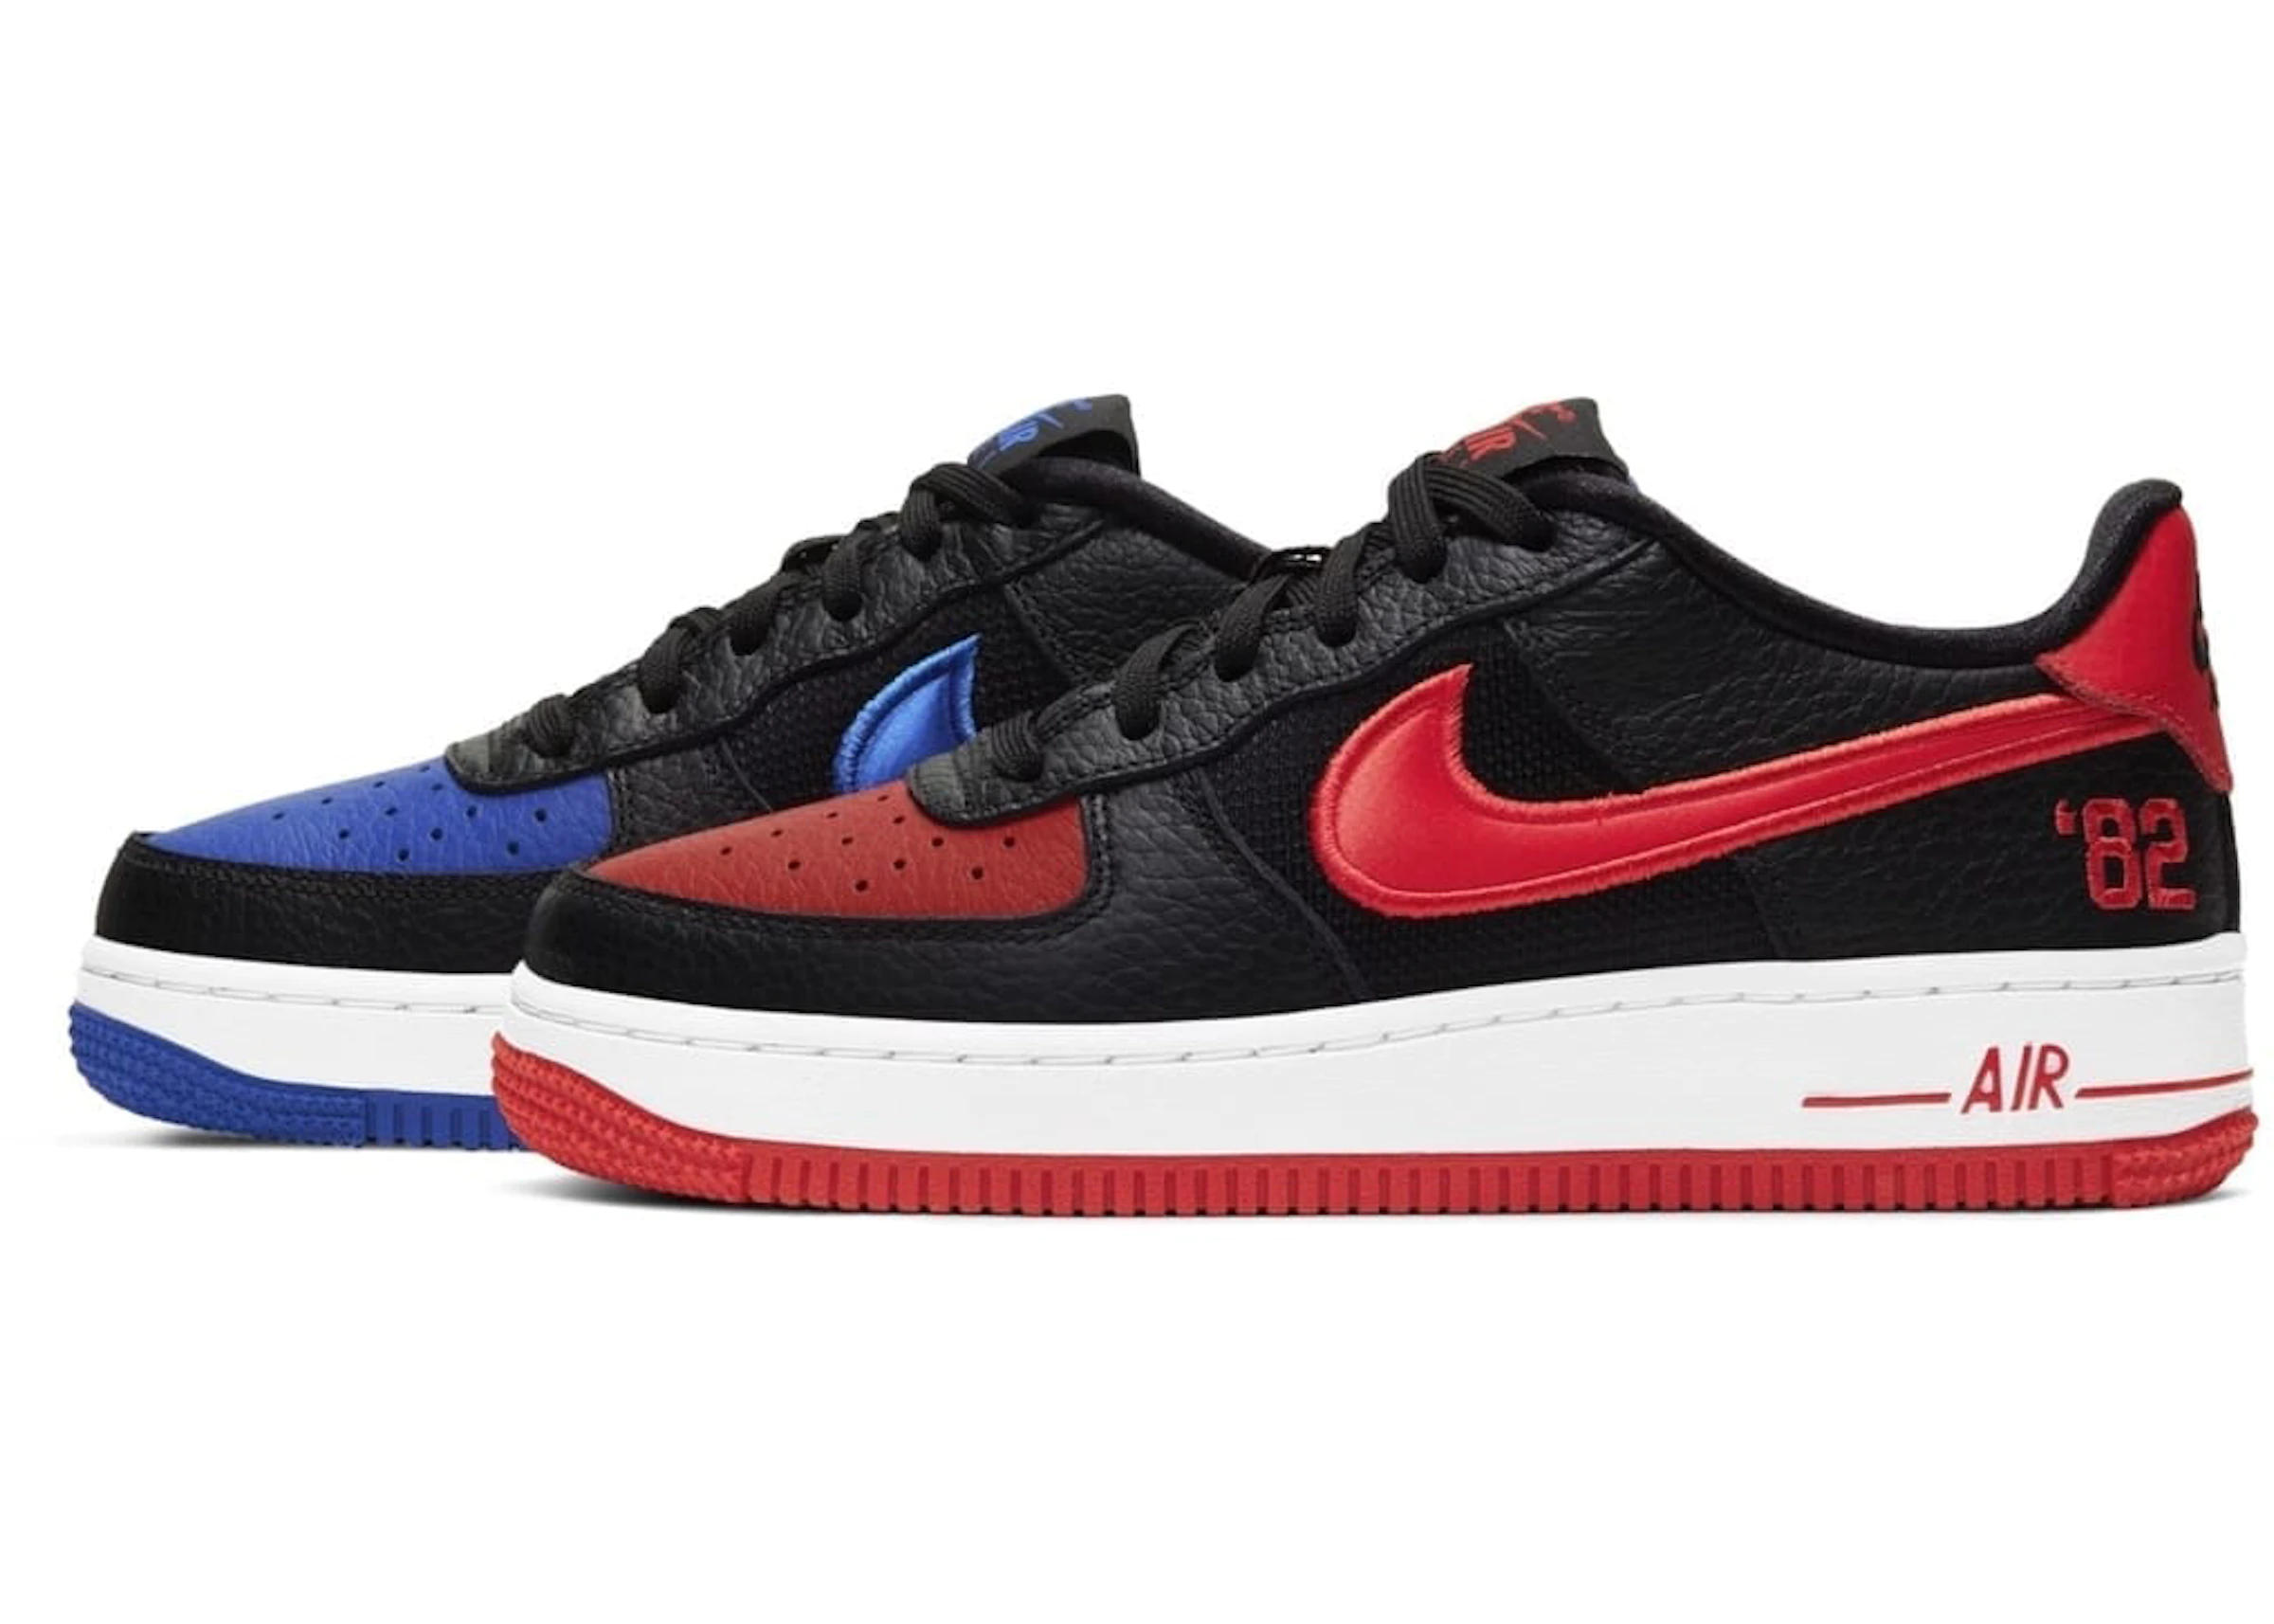 Production center map Personal Nike Air Force 1 Low 82 (GS) - DH0201-001 - US